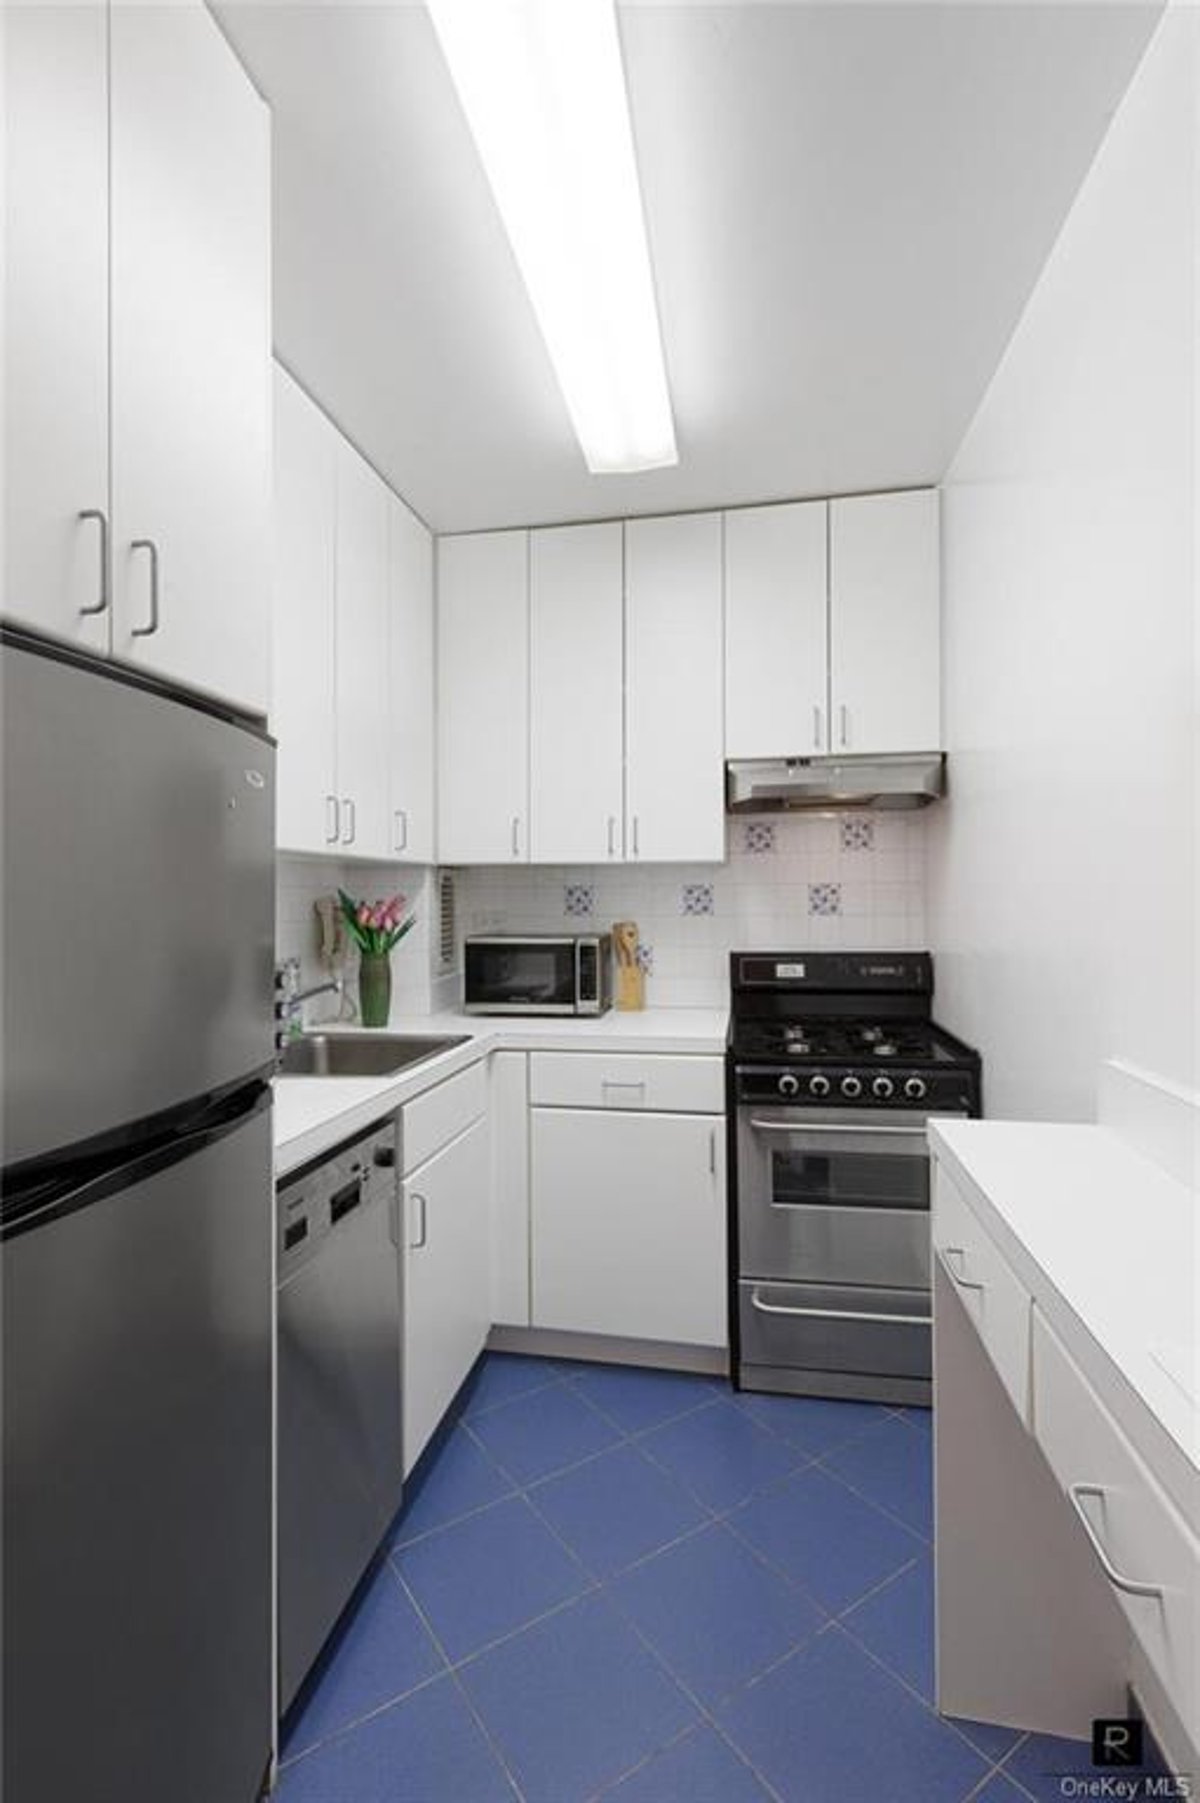 Photo for Mayfair Towers - 15 West 72nd Street Cooperative in Upper West Side, Manhattan